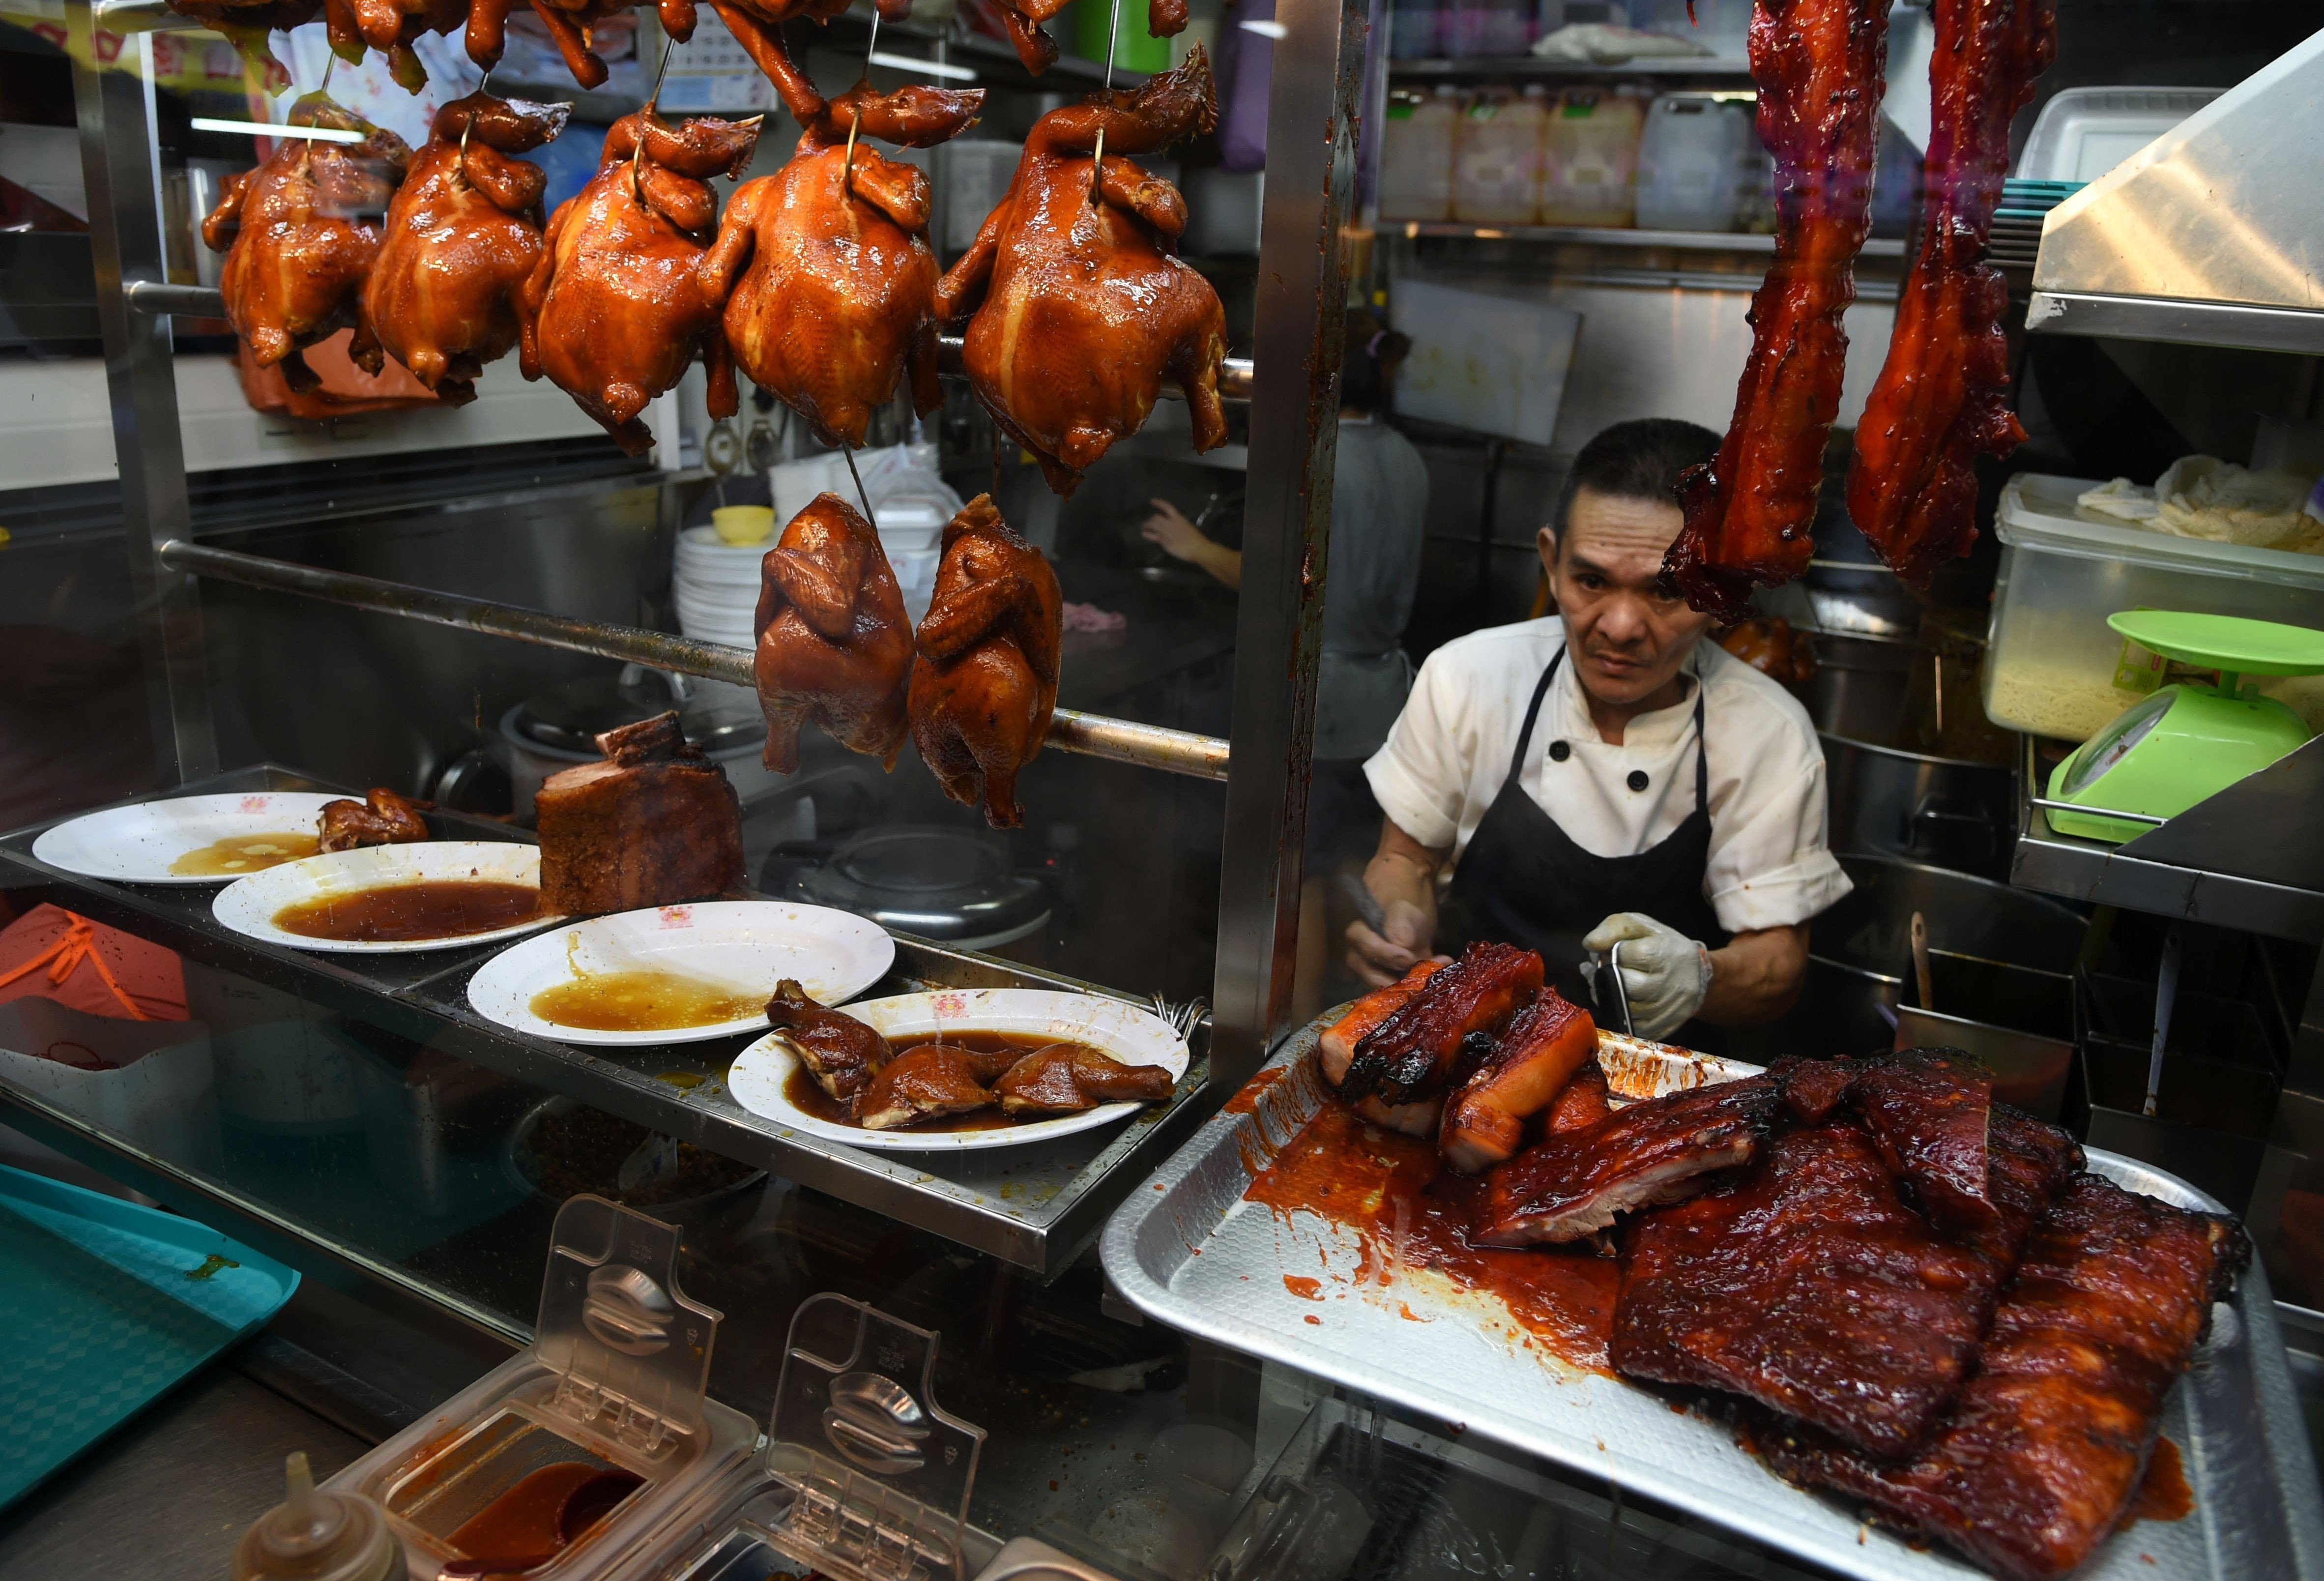 As street food vendors across most of Asia face an unappetising future, Singapore’s hawkers are winning Michelin stars and being put forward for Unesco recognition. That must be one super secret ingredient ...